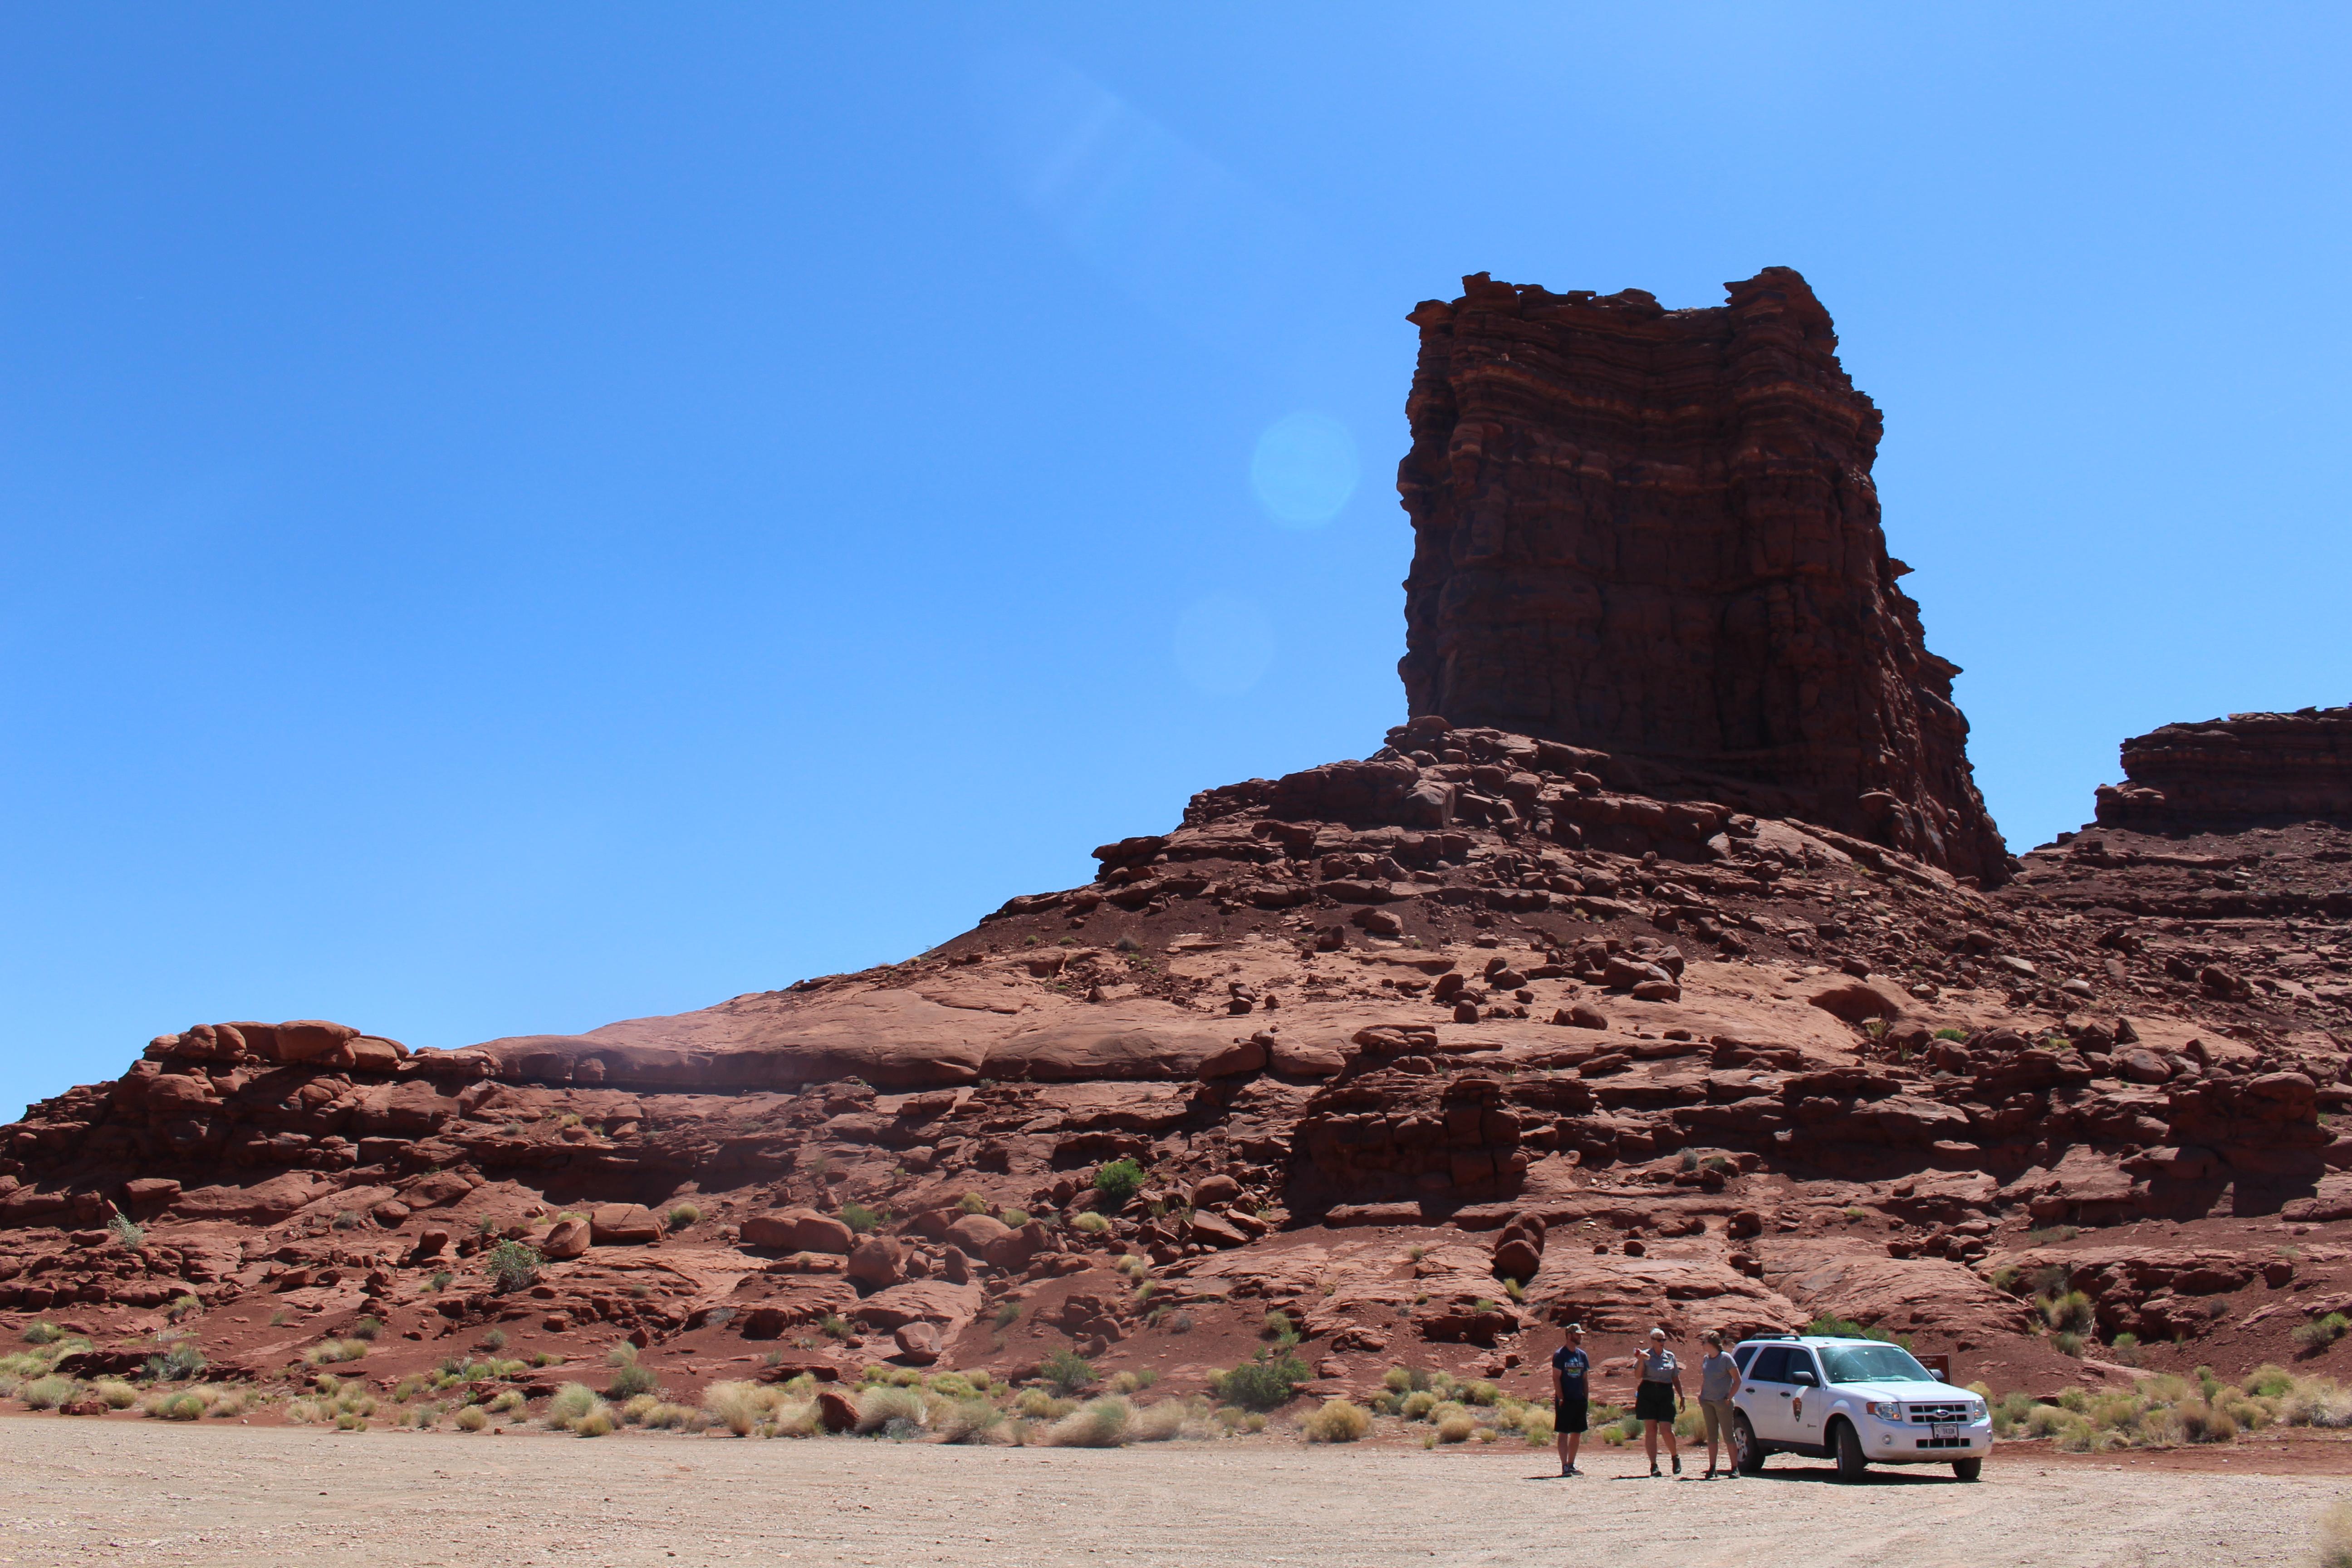 Three people and a vehicle at the base of a large sandstone butte